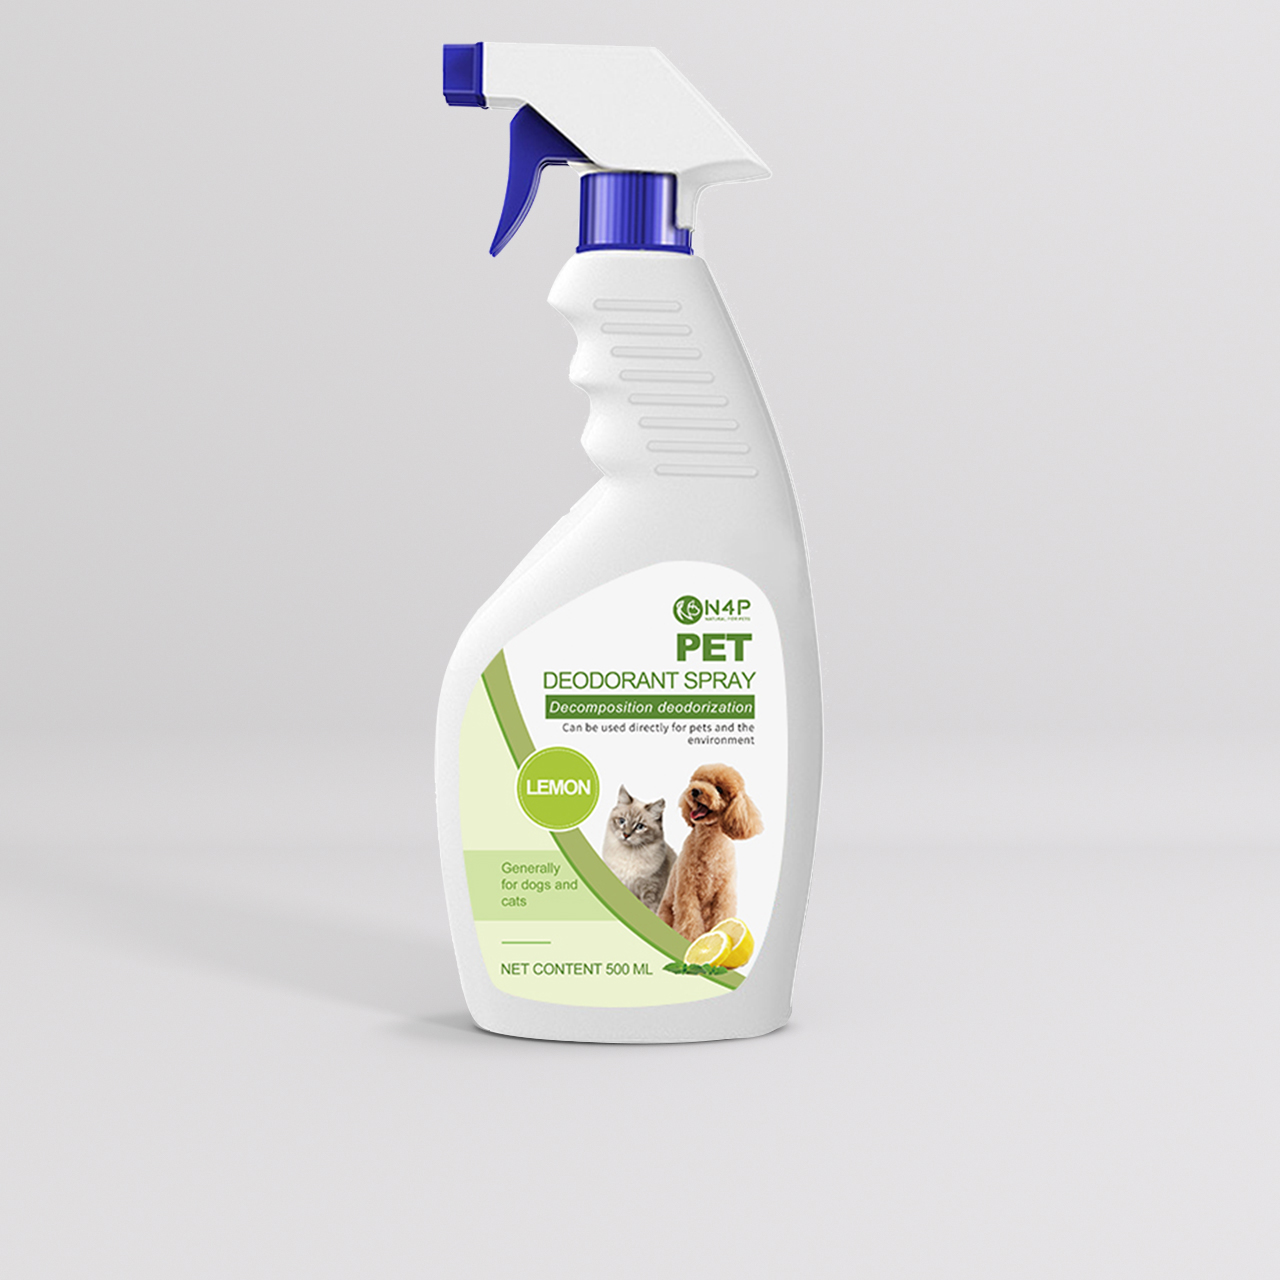 Keep Your Pets Smelling Fresh with N4P Brand Deodorant Spray for Dogs and Cats